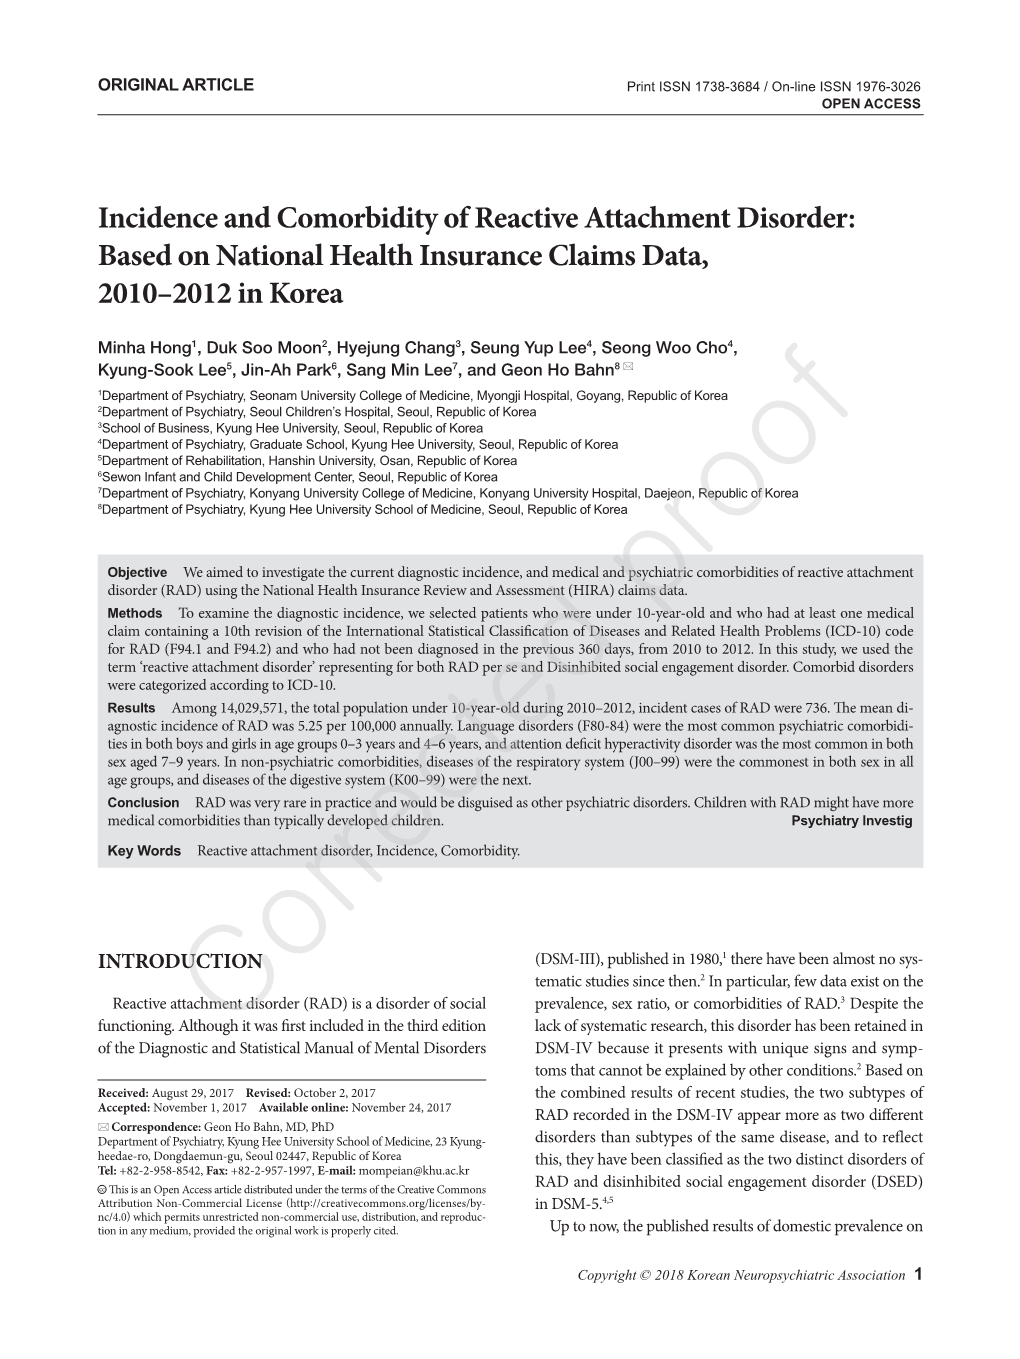 Incidence and Comorbidity of Reactive Attachment Disorder: Based on National Health Insurance Claims Data, 2010–2012 in Korea